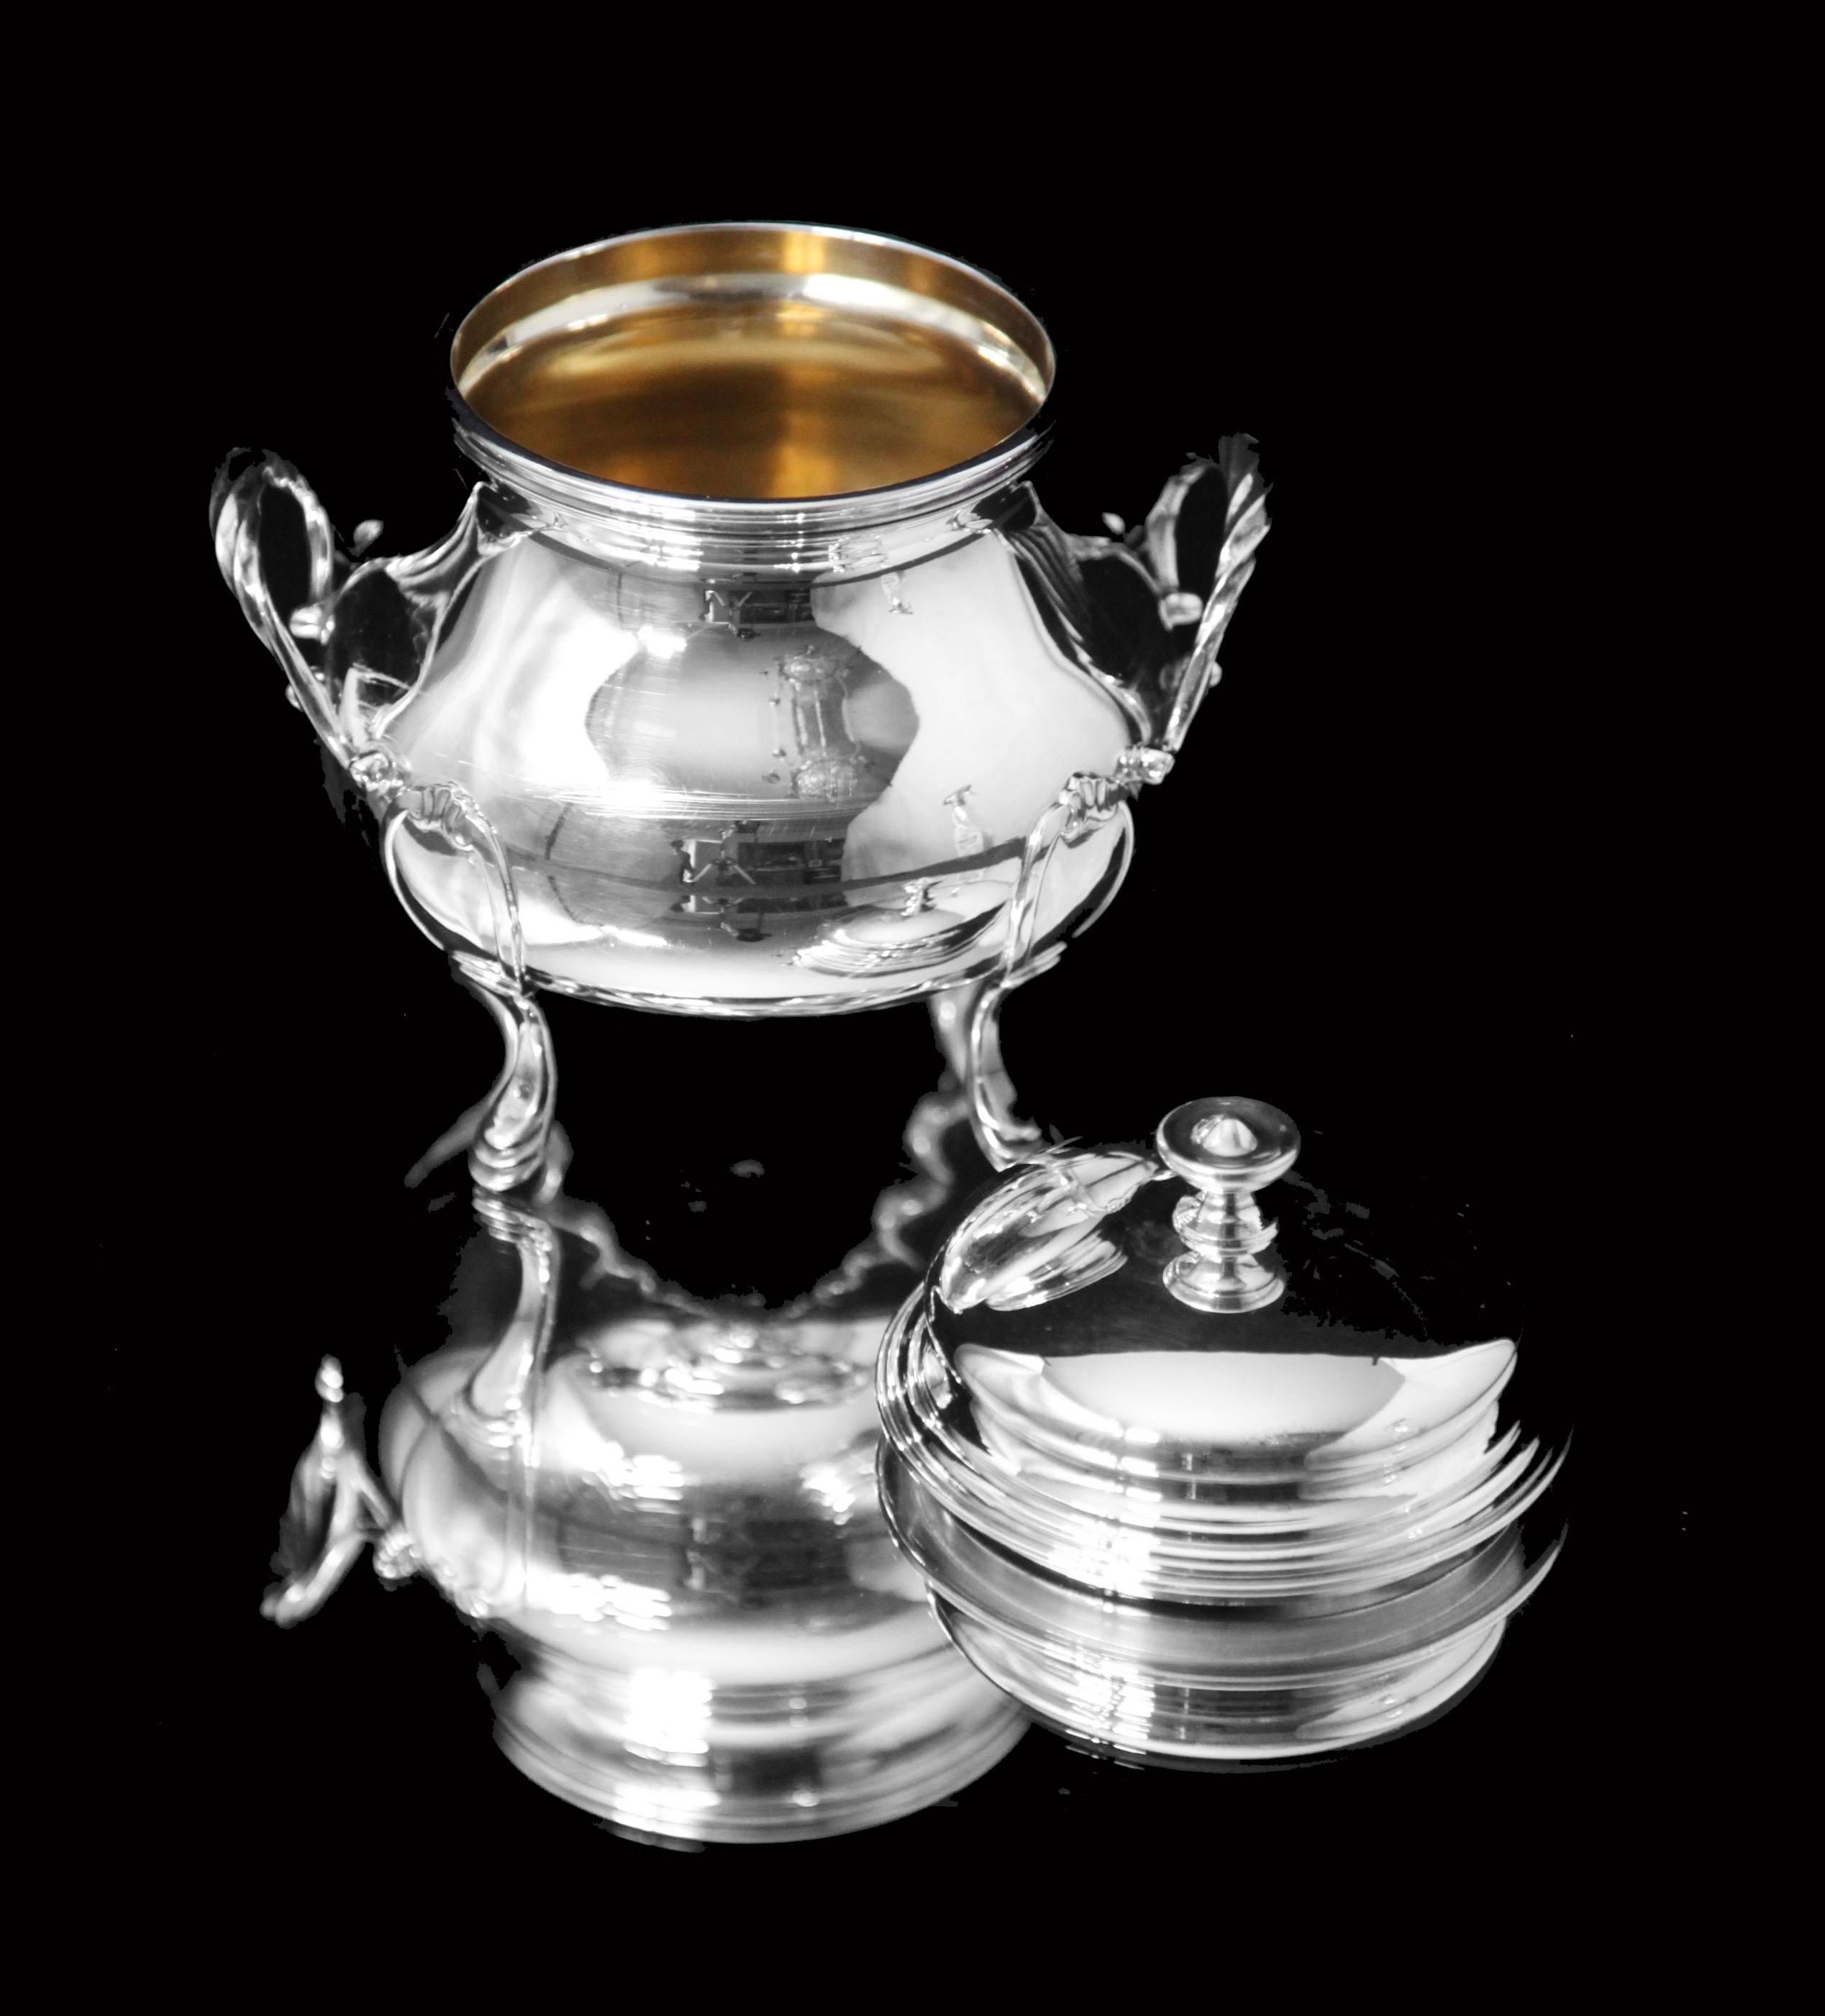 Odiot Henin - 5pc. Antique French 950 Sterling Silver Louis XVI Tea Set + Tray For Sale 5